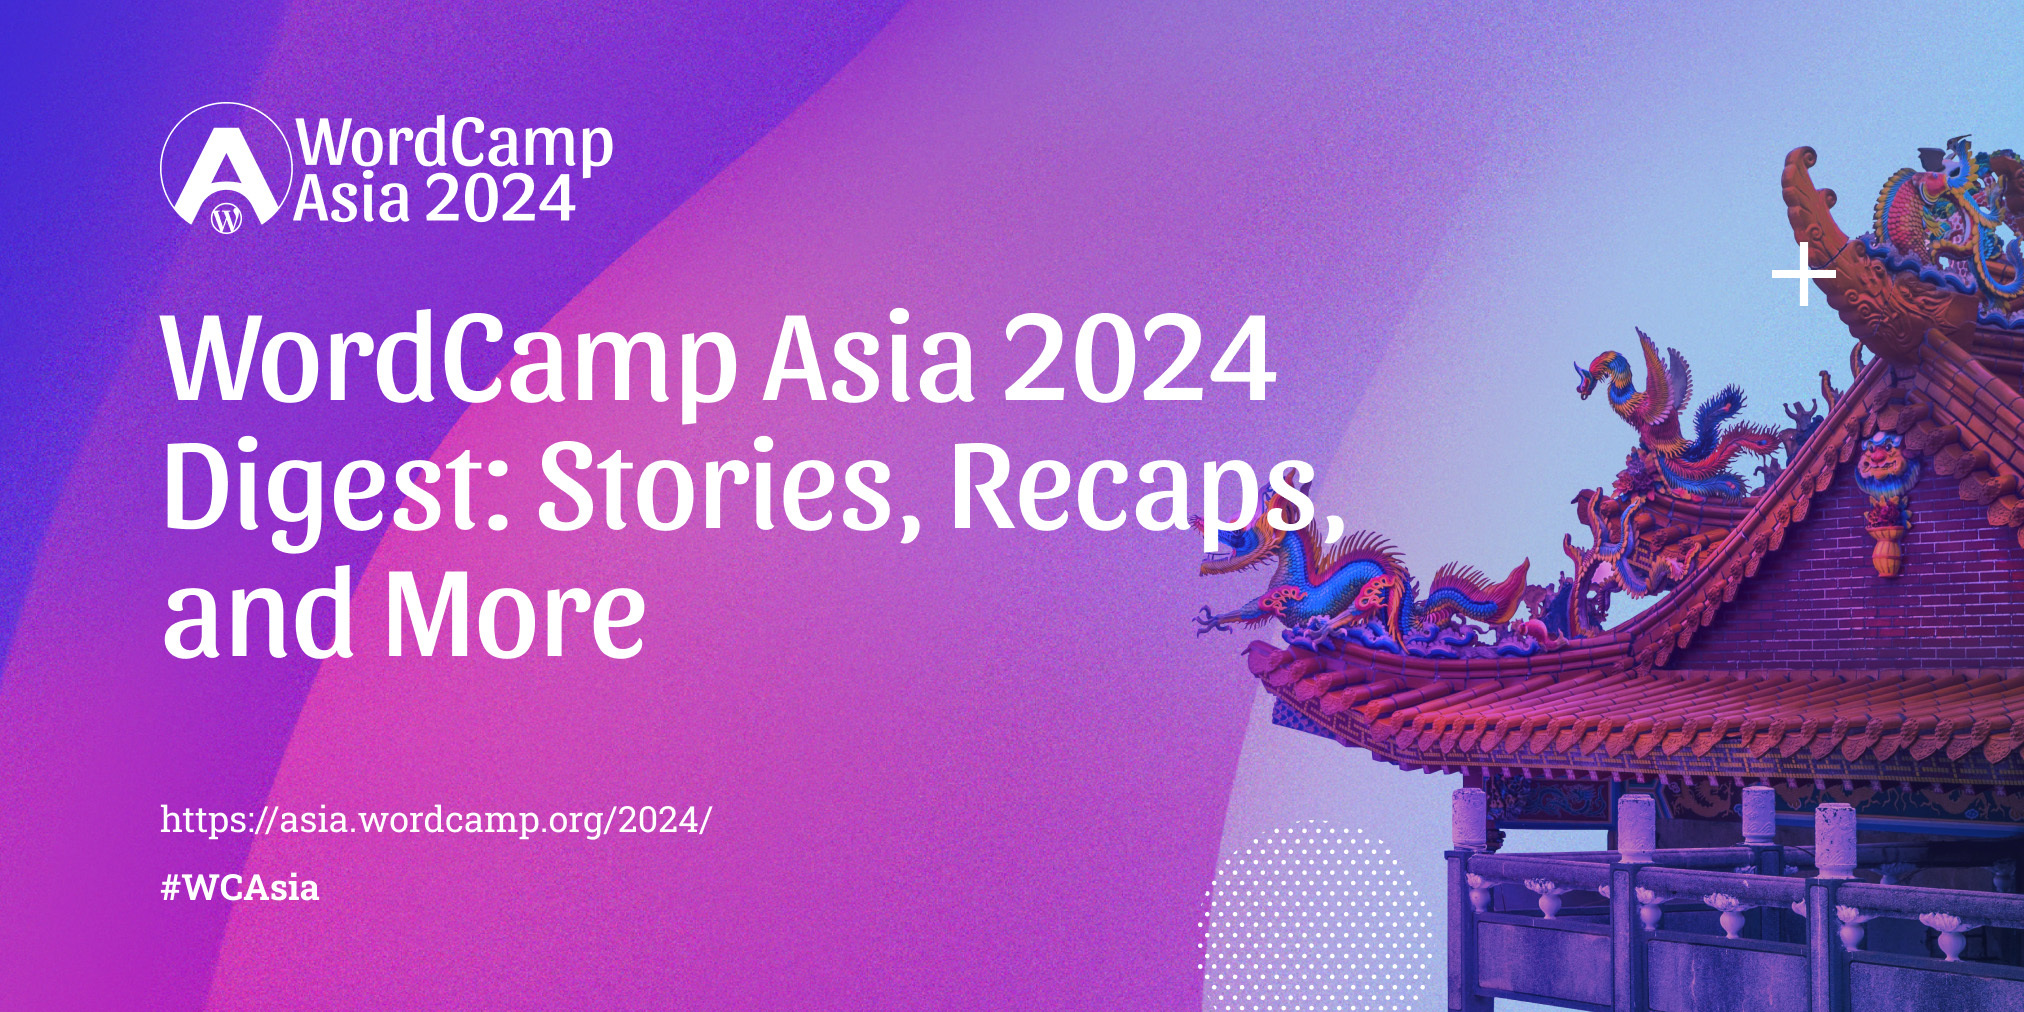 WordCamp Asia 2024 Digest: Stories, Recaps, and More